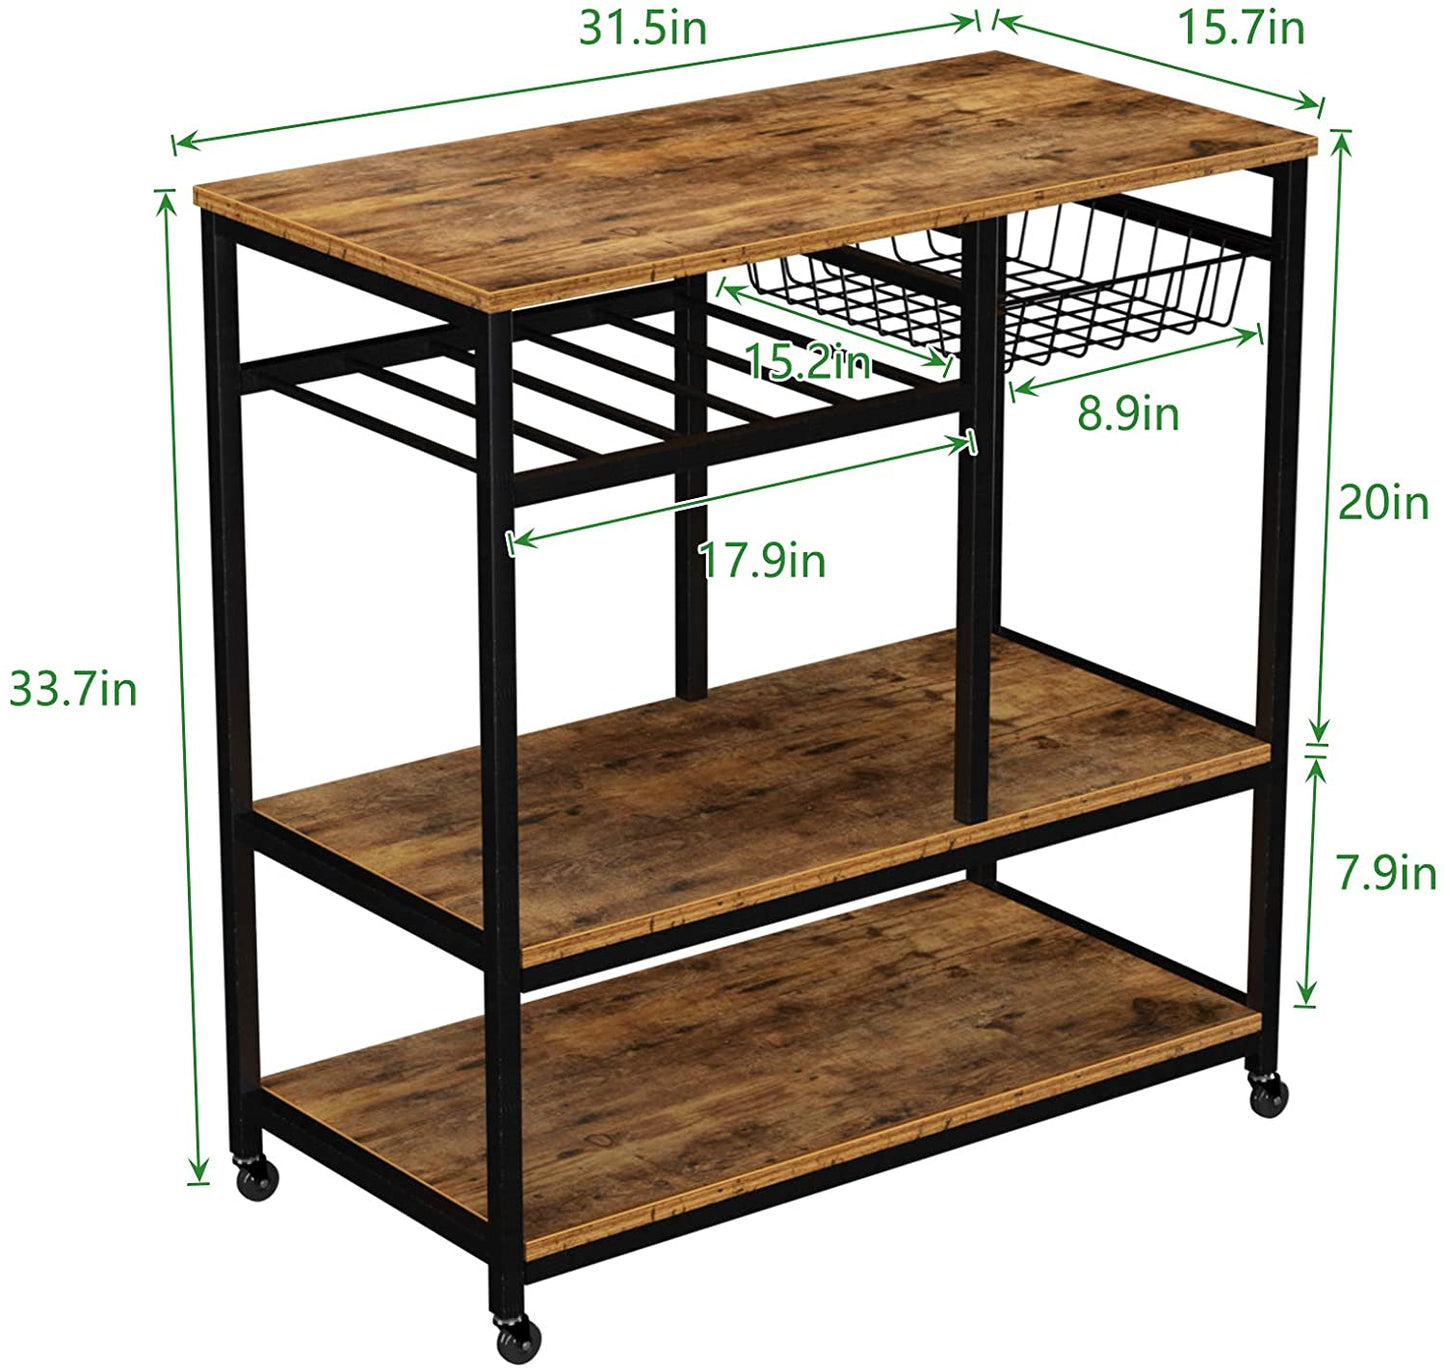 SogesPower Wood Kitchen Island Cart Unit, Rolling Kitchen Baker's Rack- Rustic Brown (4.3) 4.3 stars out of 18 reviews 18 reviews